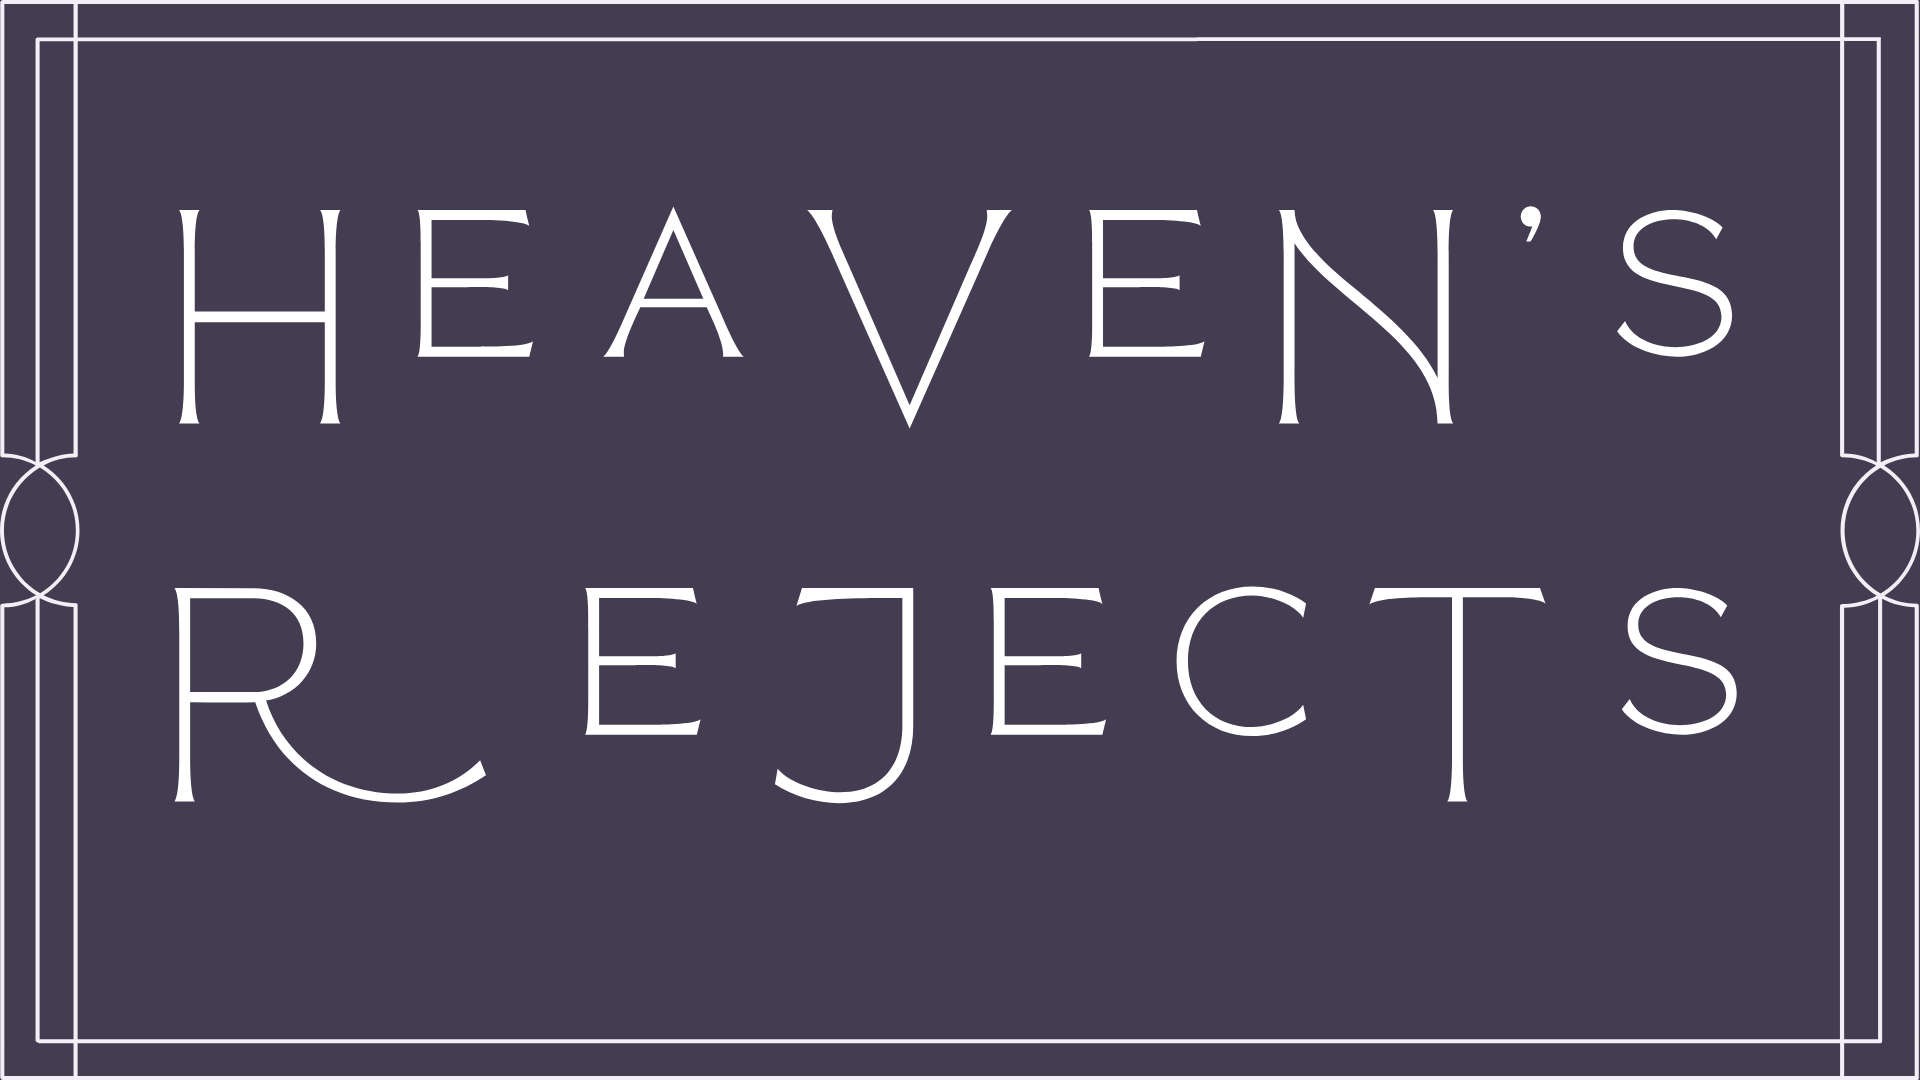 Heaven's Rejects